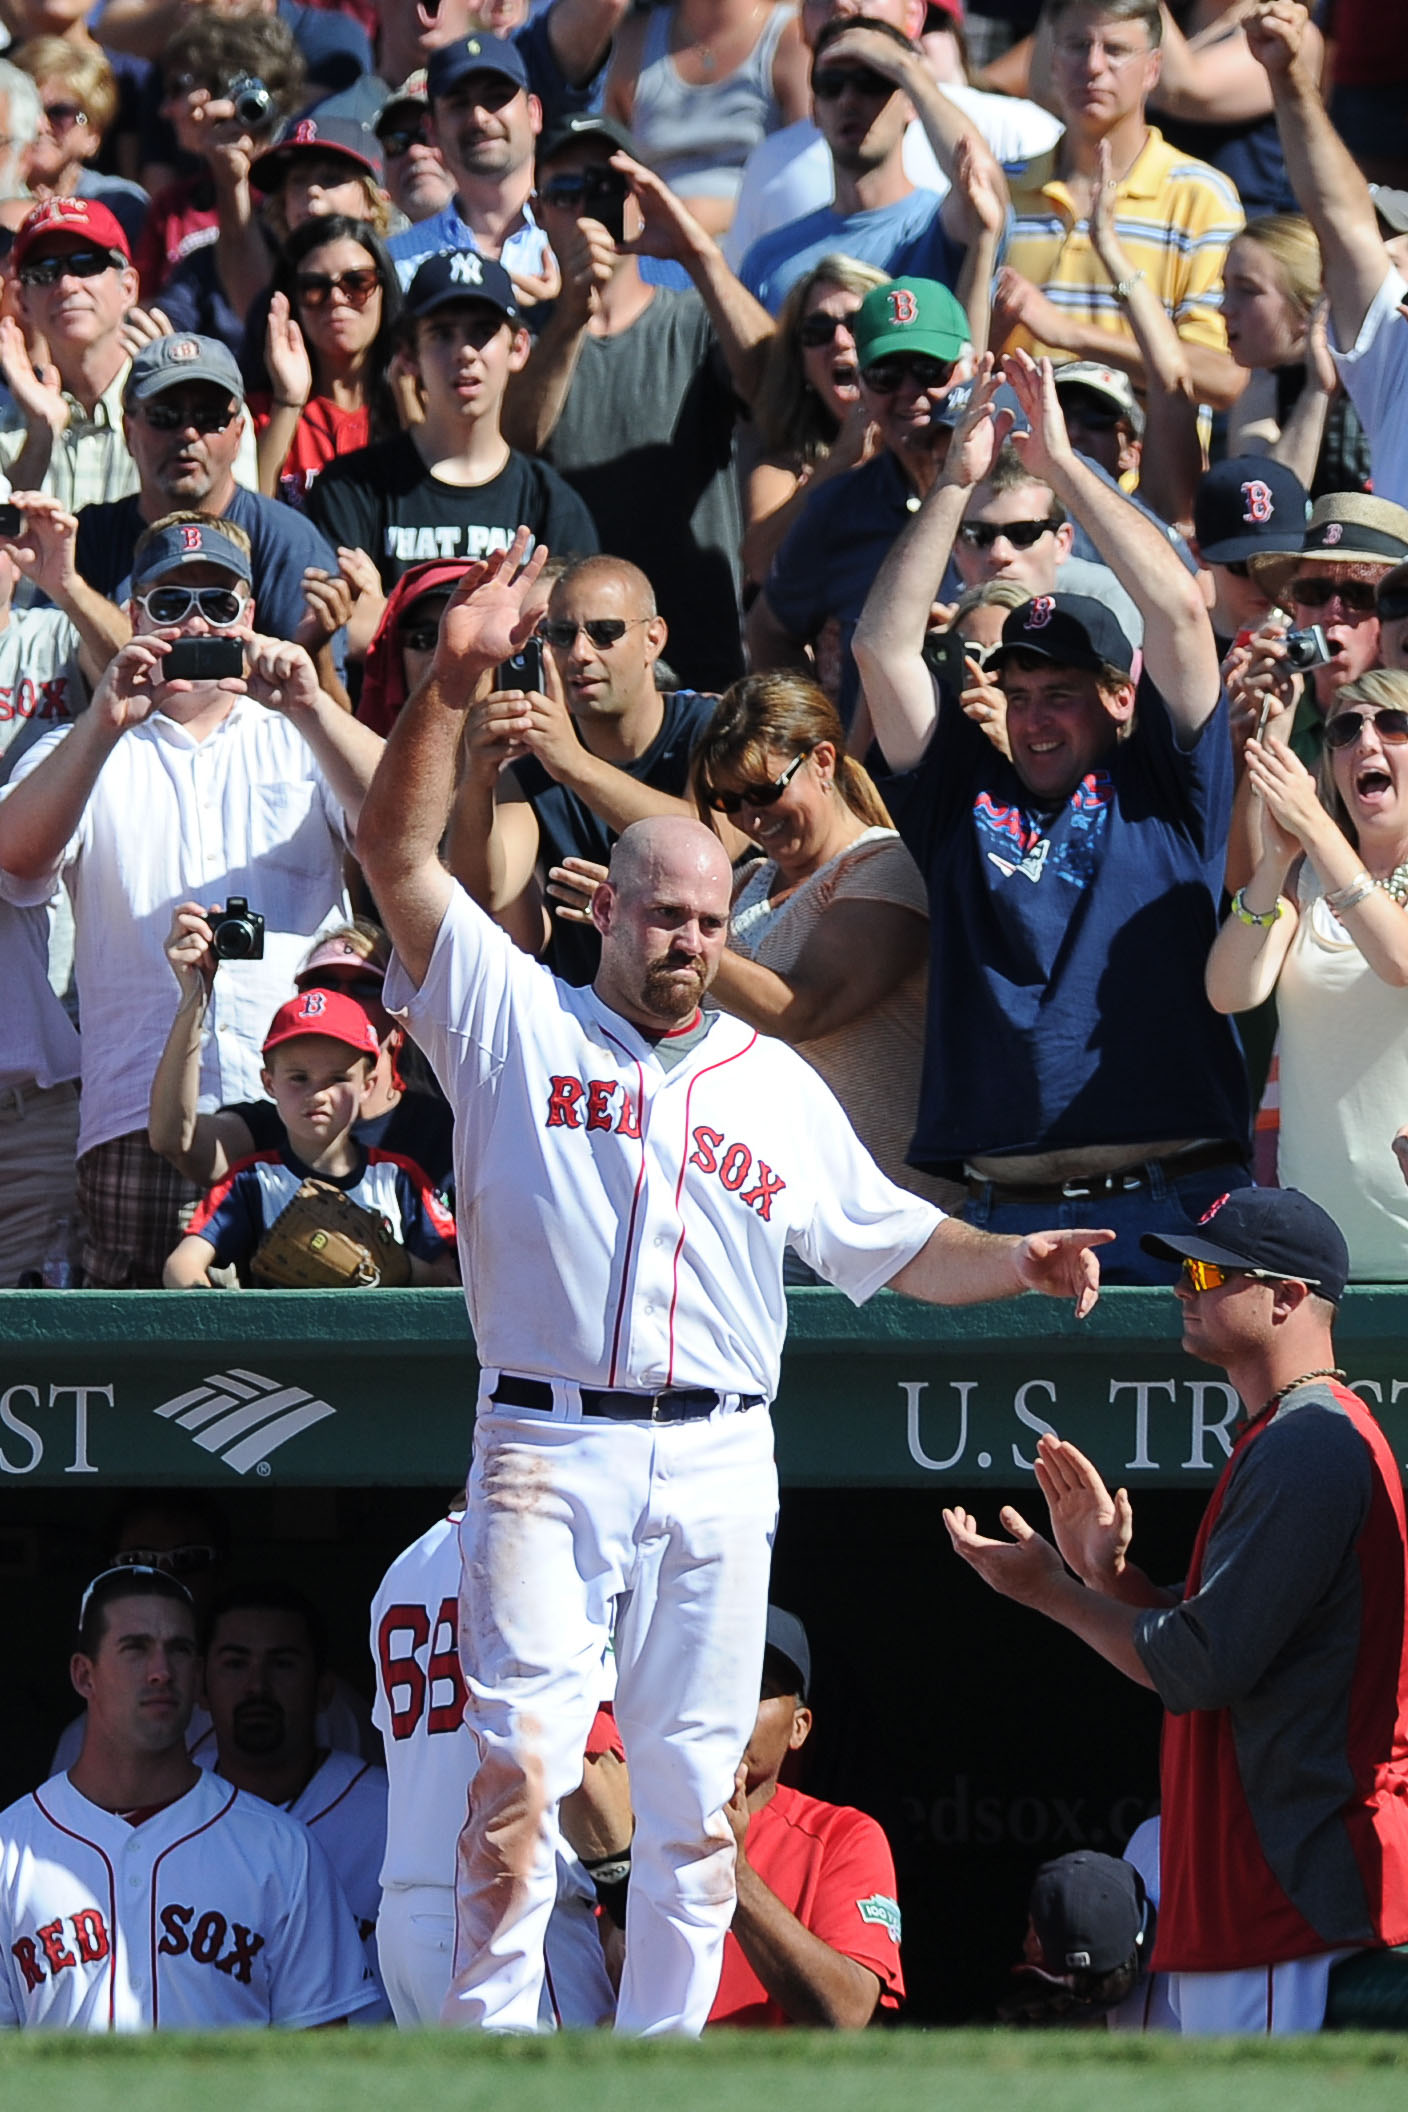 The Week Kevin Youkilis Became a Yankee